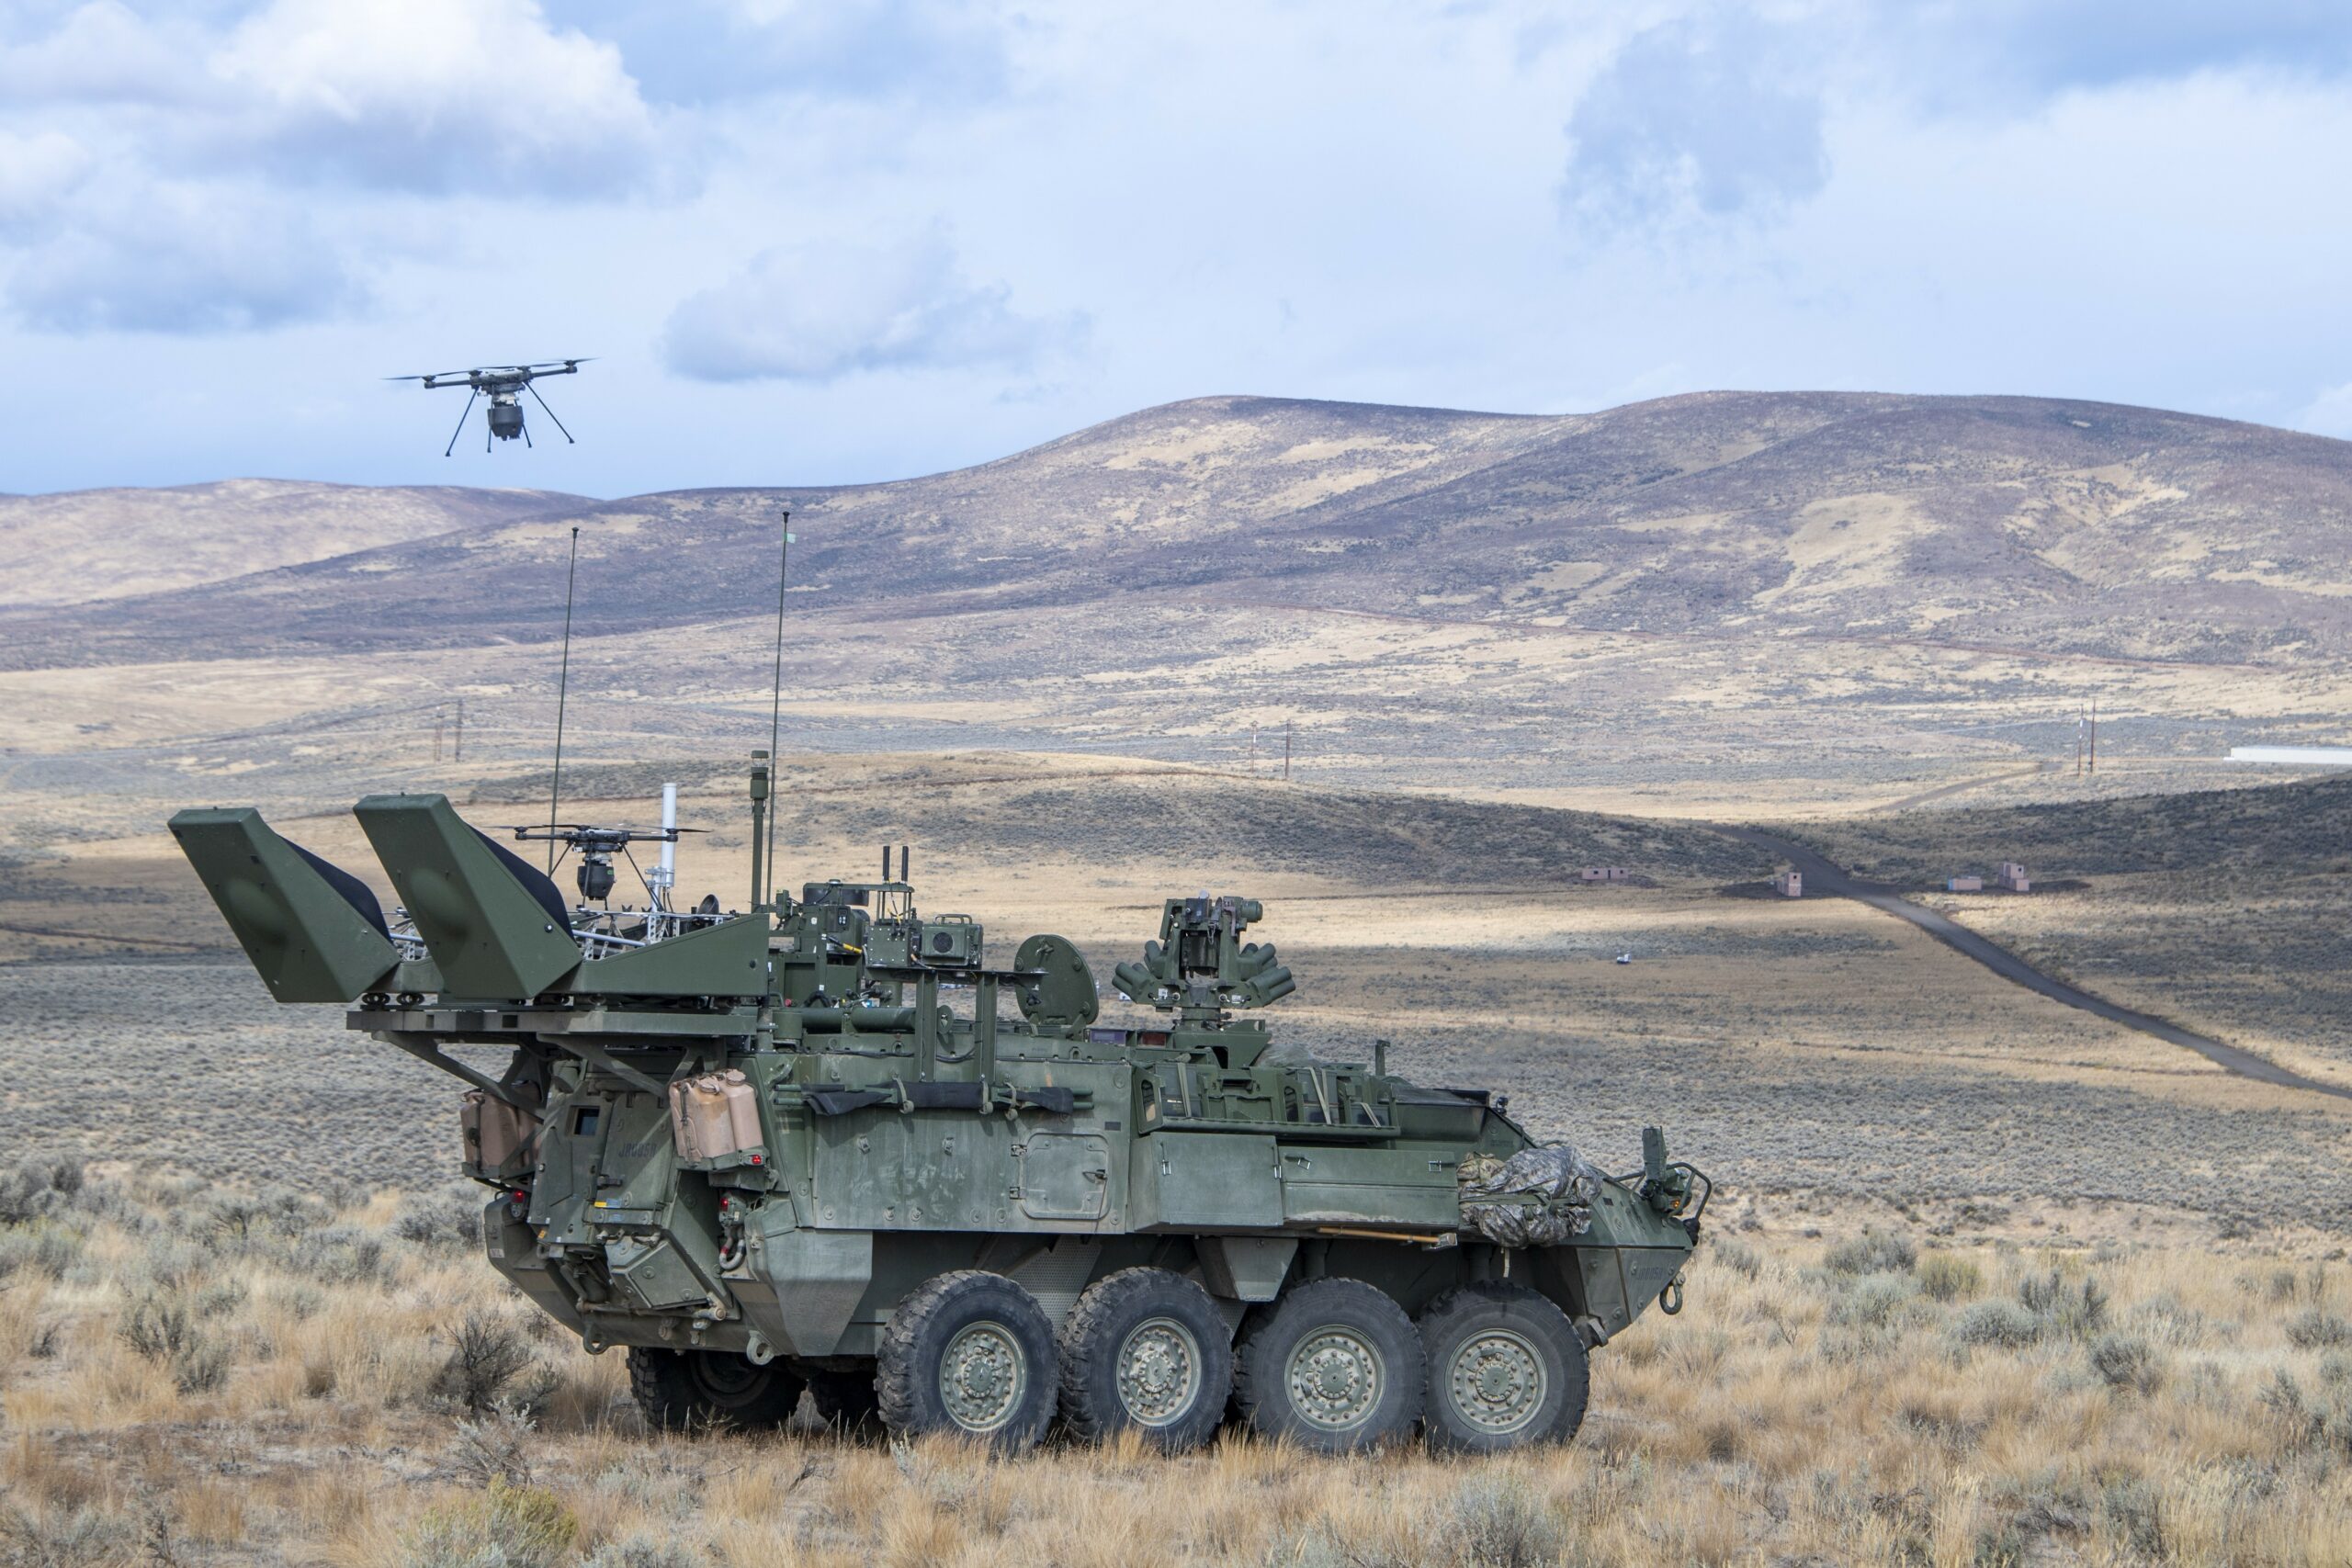 Test participants from the Reconnaissance (RECCE) Platoon, Headquarters and Headquarters Company, 23rd Brigade Engineer Battalion, launch a Small Unmanned Aerial System (sUAS) to conduct remote detection of biological warfare agents, while conducting stand-off scanning with the Sensor Suite Upgrade (SSU) on an M1135 variant Stryker — the Army’s high-speed, high-mobility, armored carrier. (U.S. Army photo by Tad Browning)